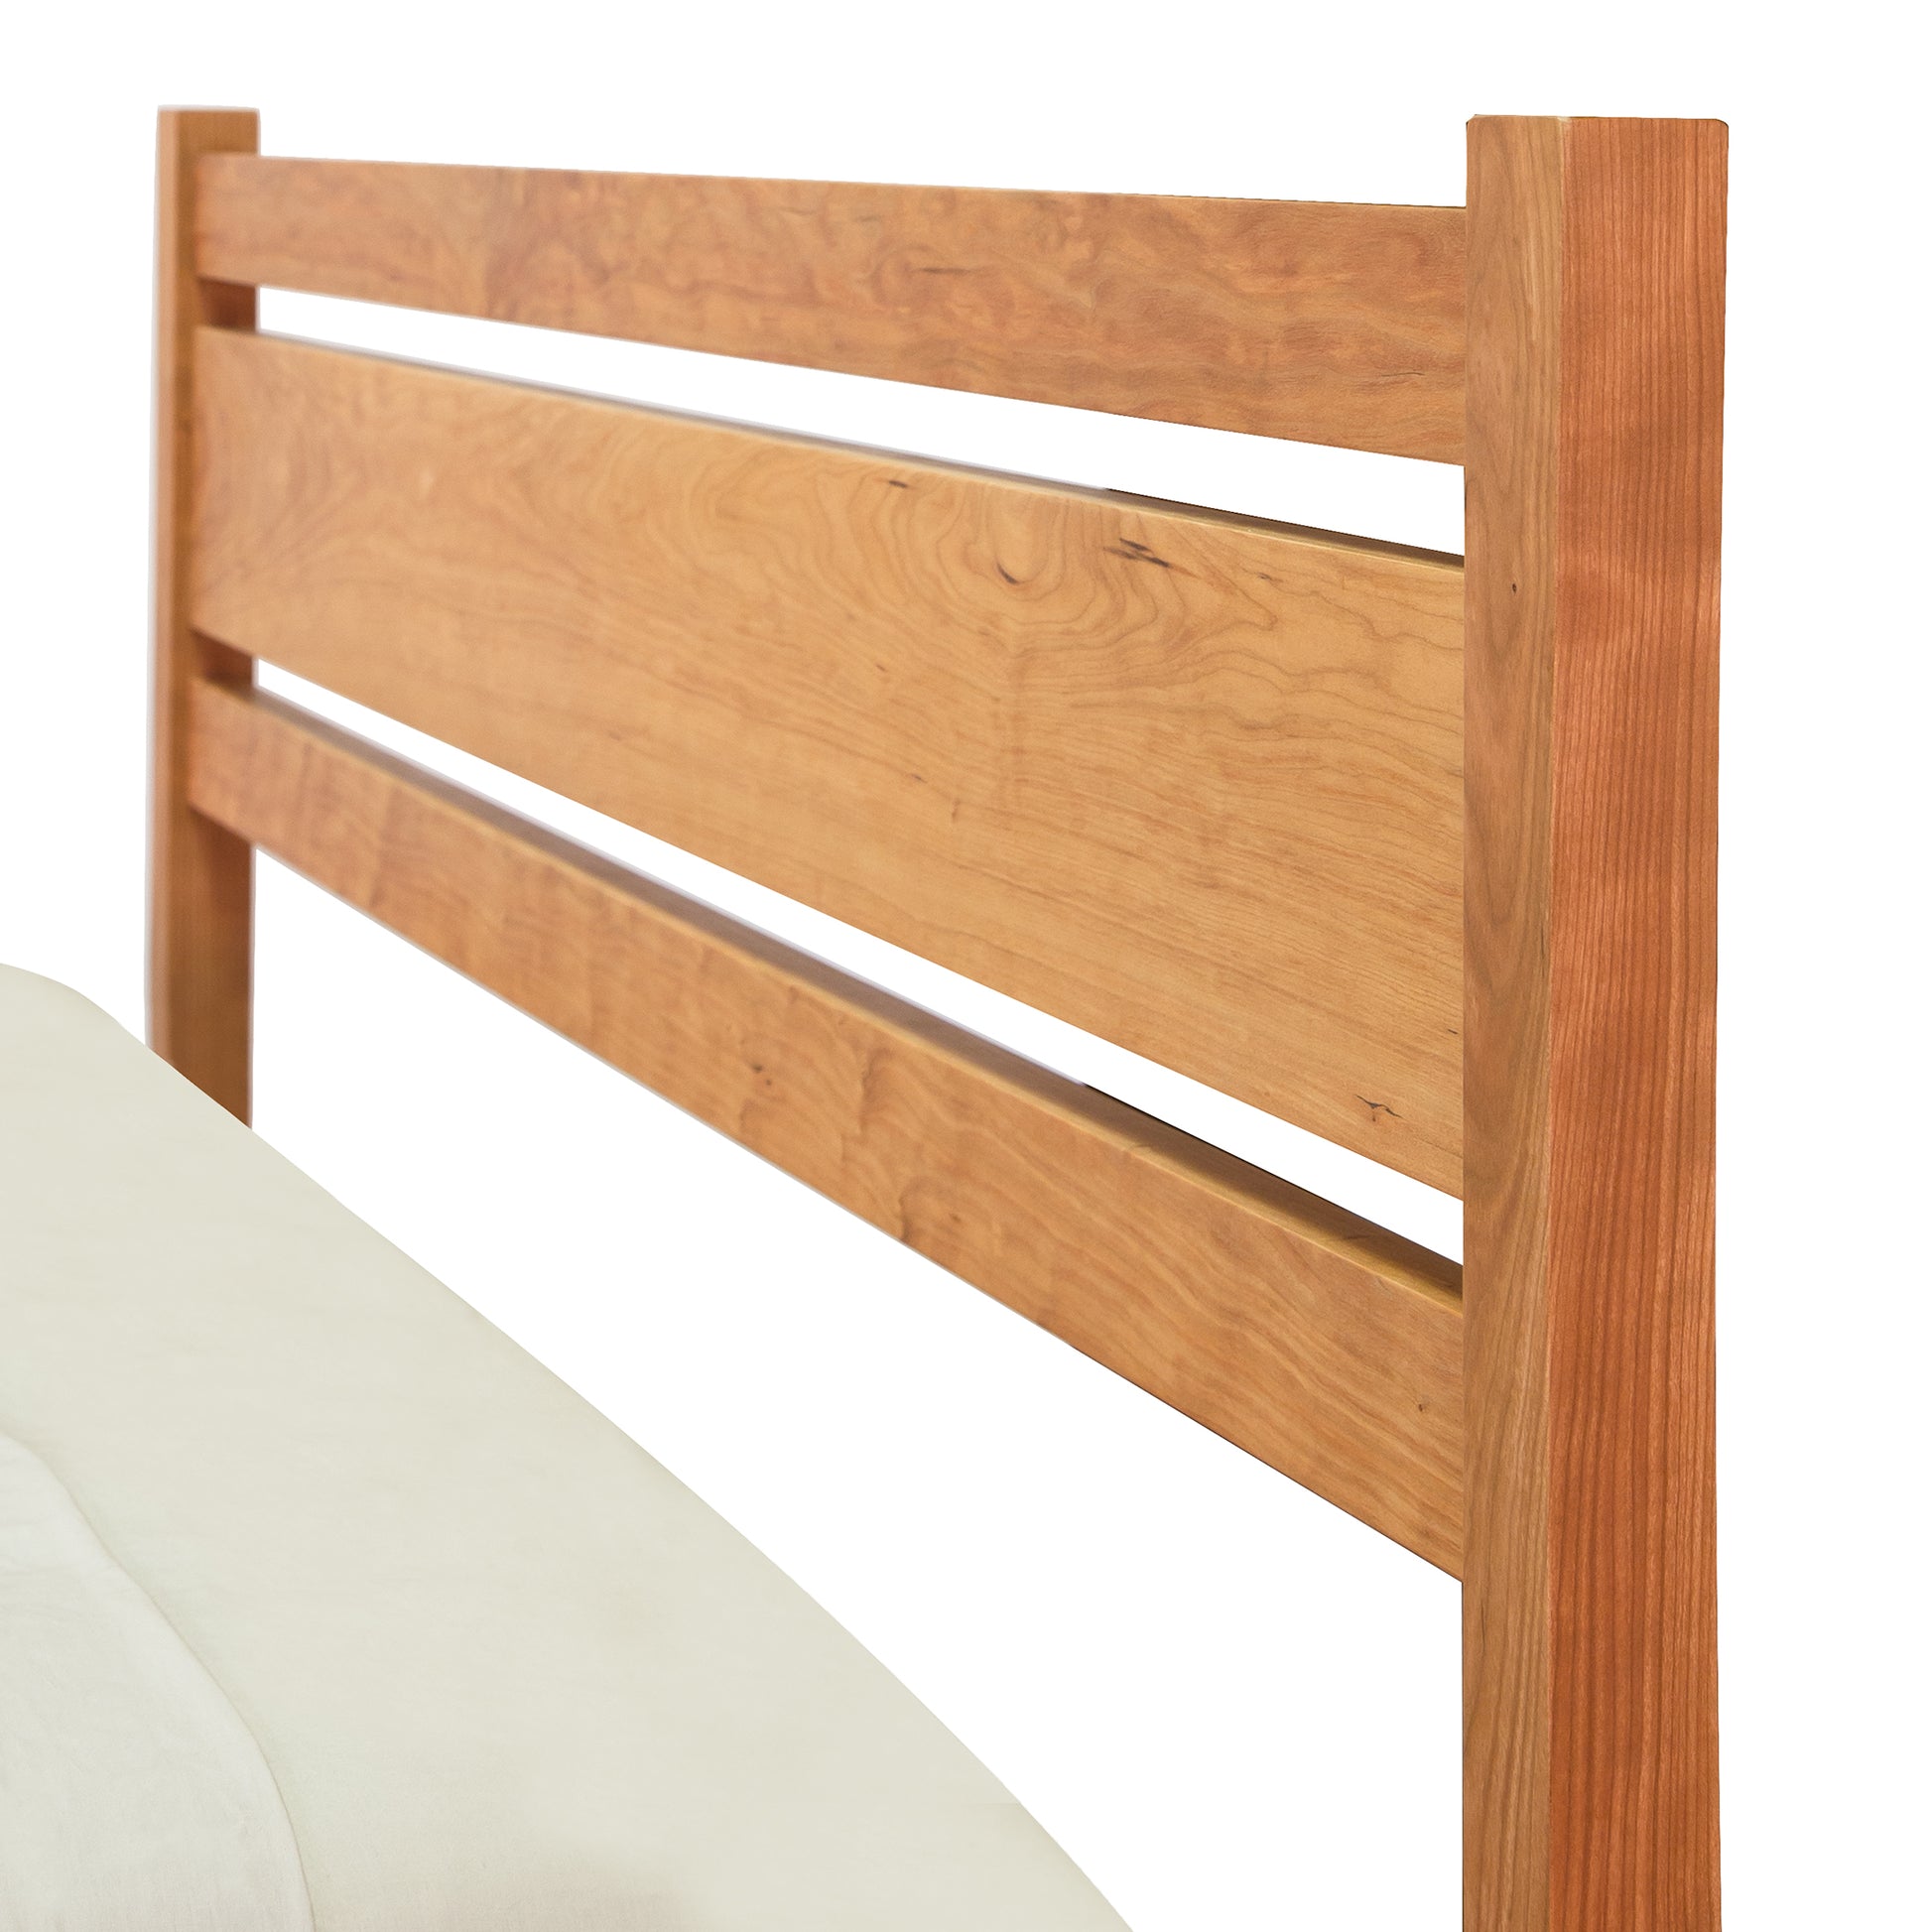 Horizon Platform bed headboard from Vermont Furniture Designs with a simple horizontal slat design, isolated on a white background.